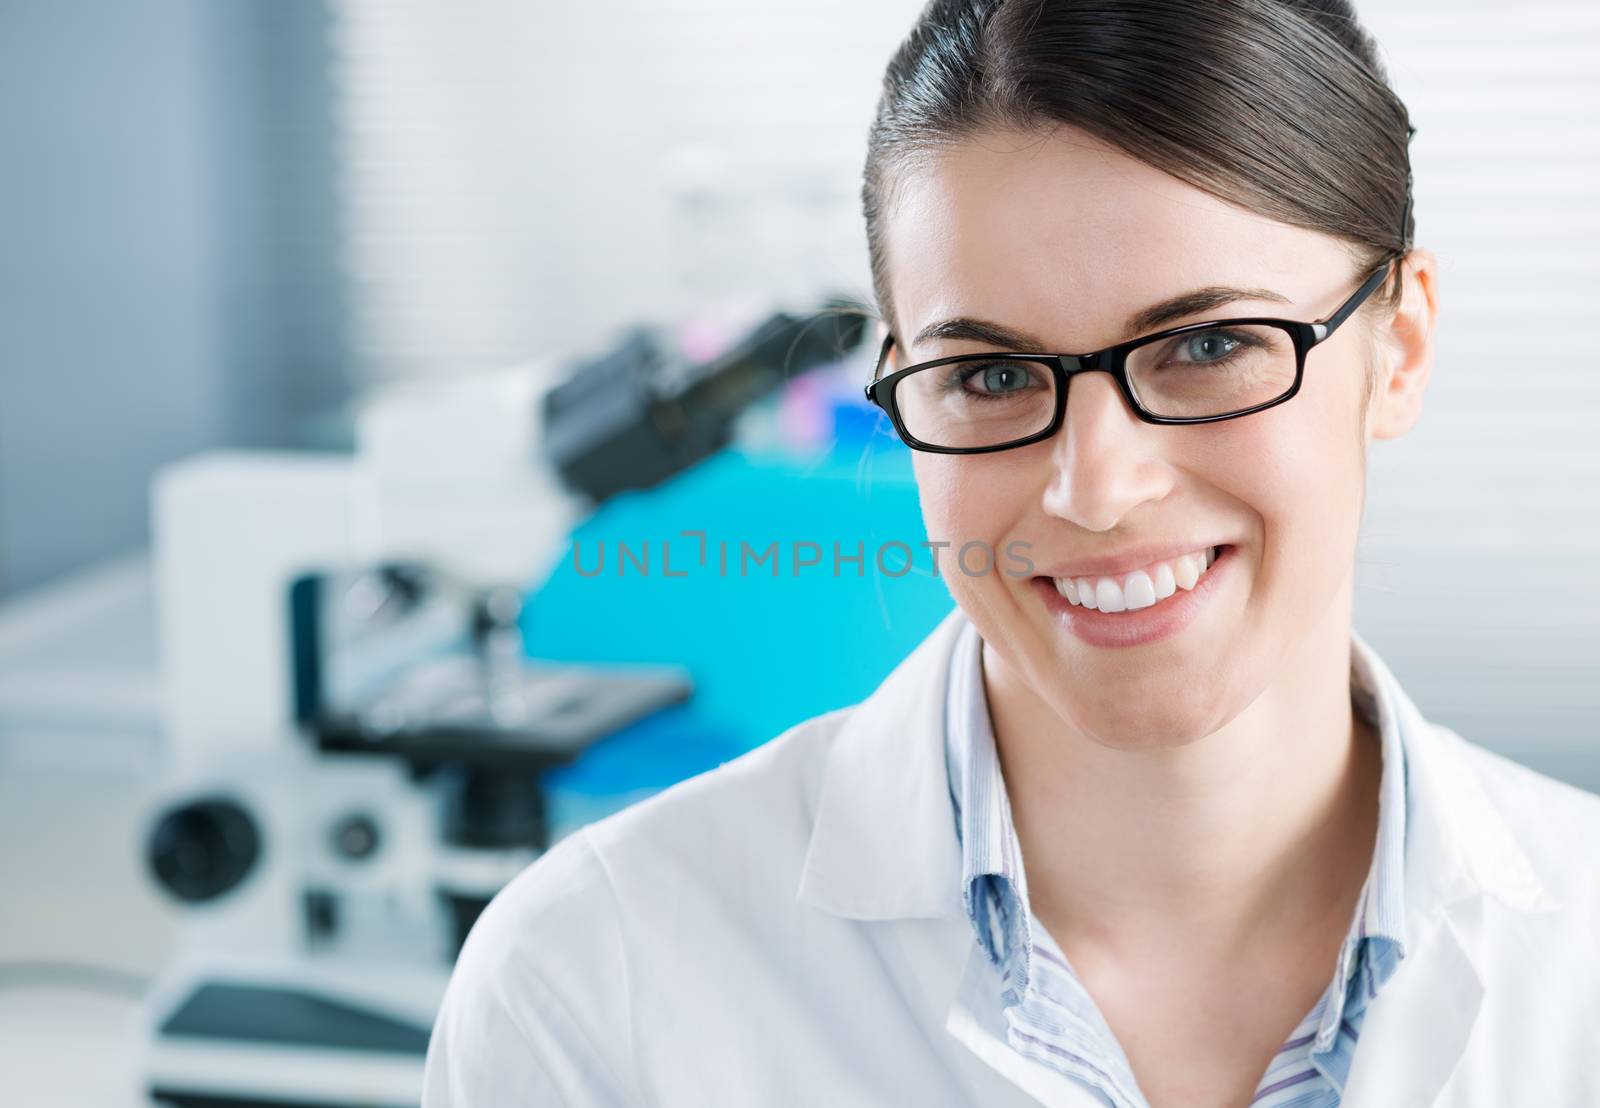 Young female researcher in the chemistry lab with equipment on background.